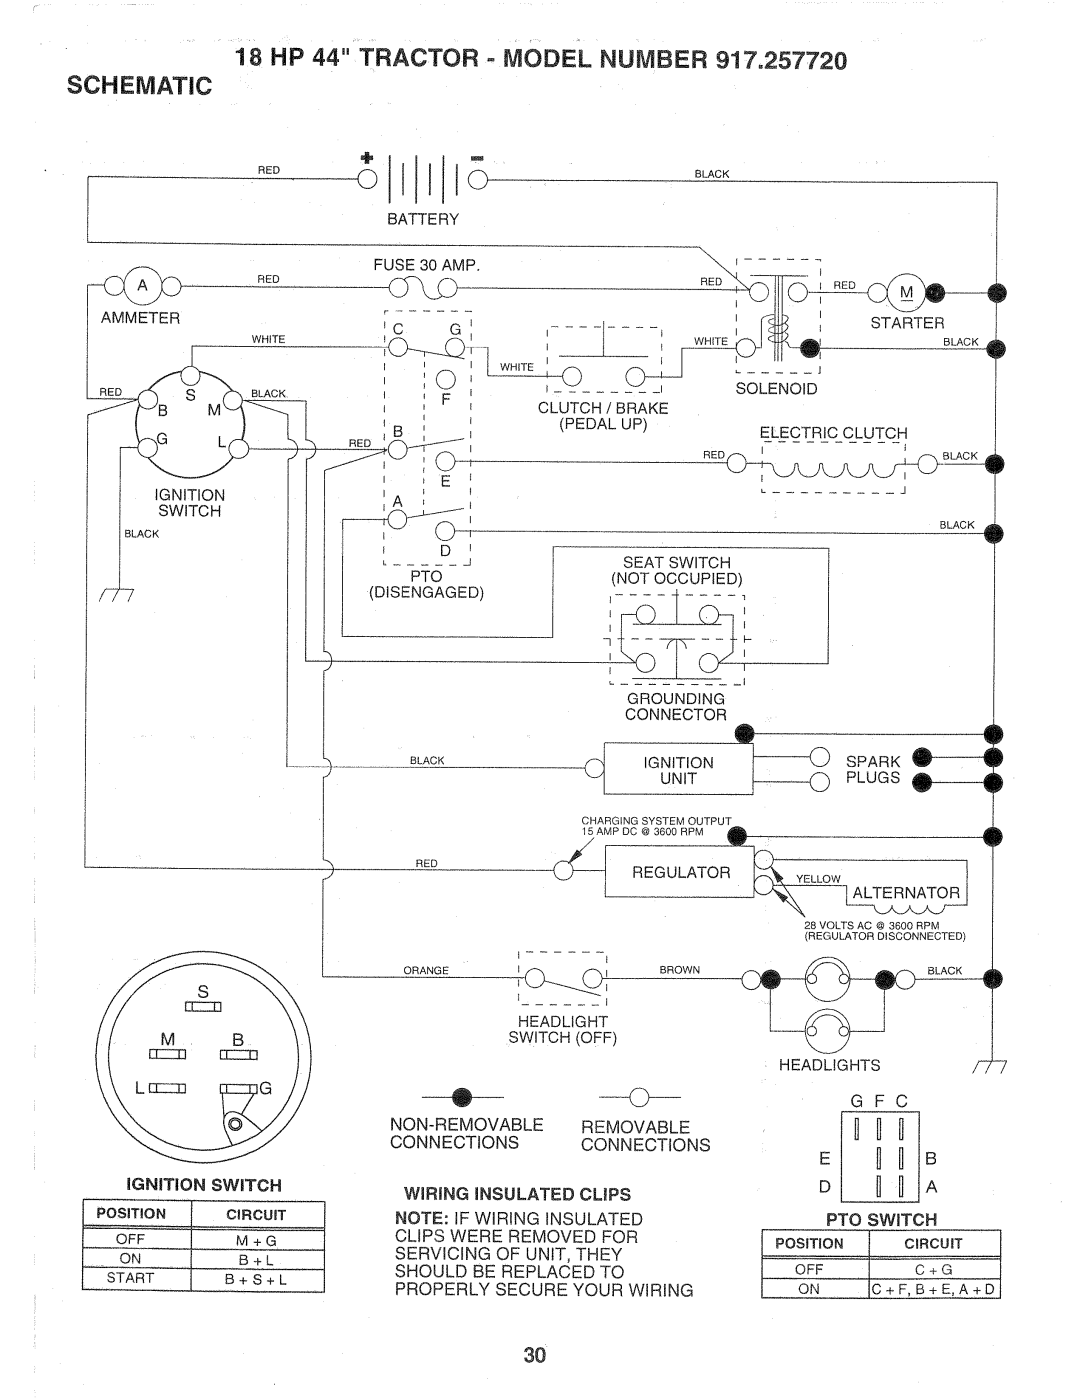 Sears 917.257720 Starter, REDo--_aa X a /--O_L!I, Blao, 18 HP 44 TRACTOR = MODEL NUMBER SCHEMATIC, WH,TEhi @_, Clips 